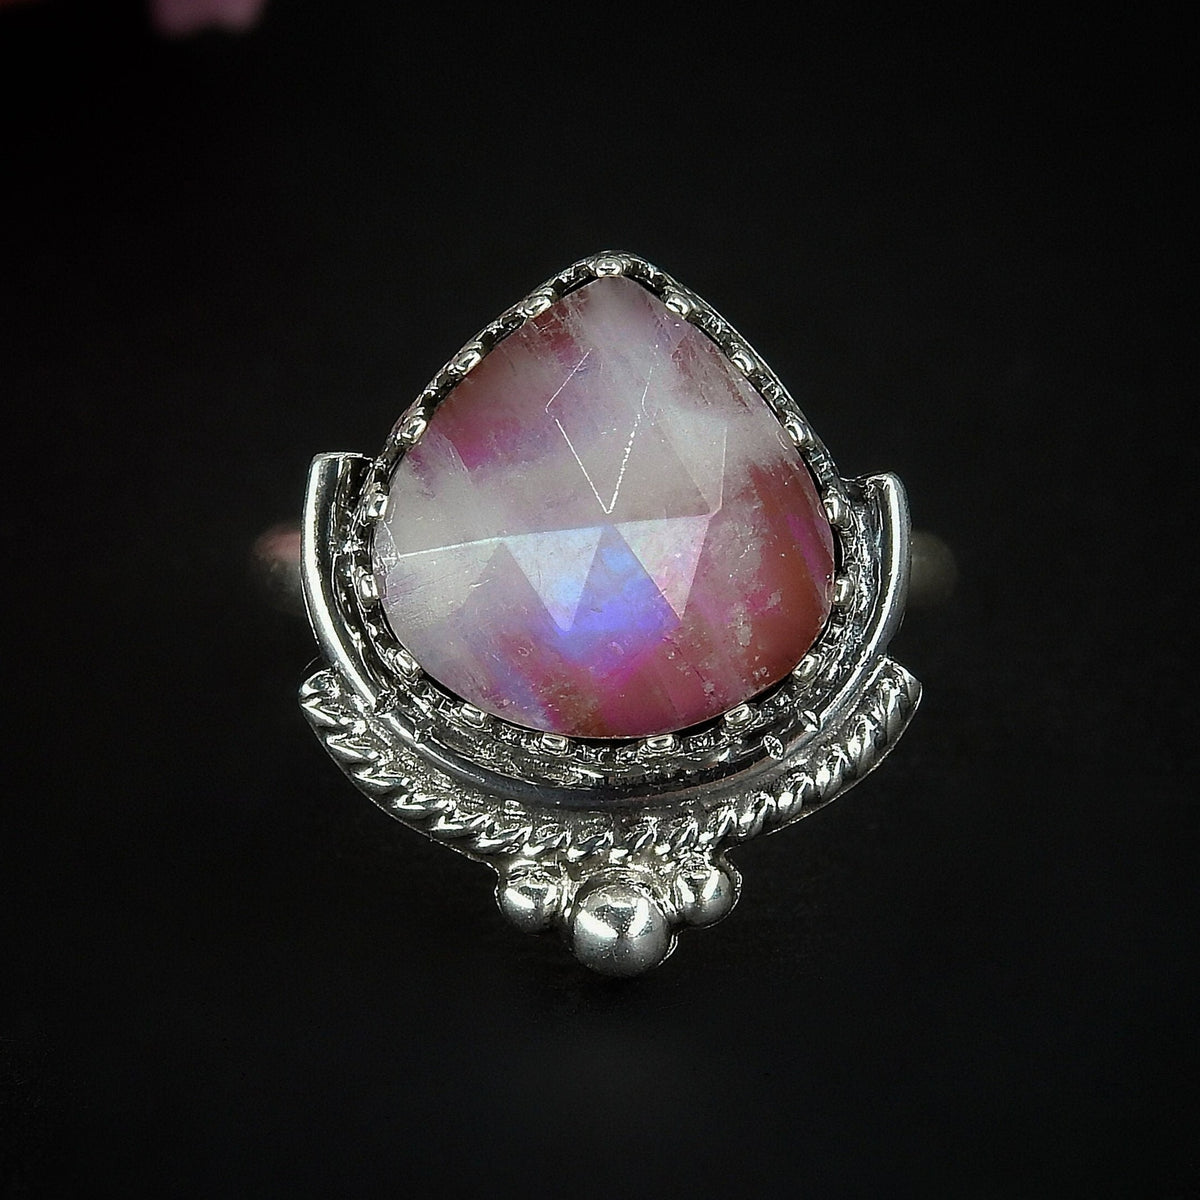 Rose Cut Moonstone & Red Jasper Ring - Size 6 1/4 to 6 1/2 